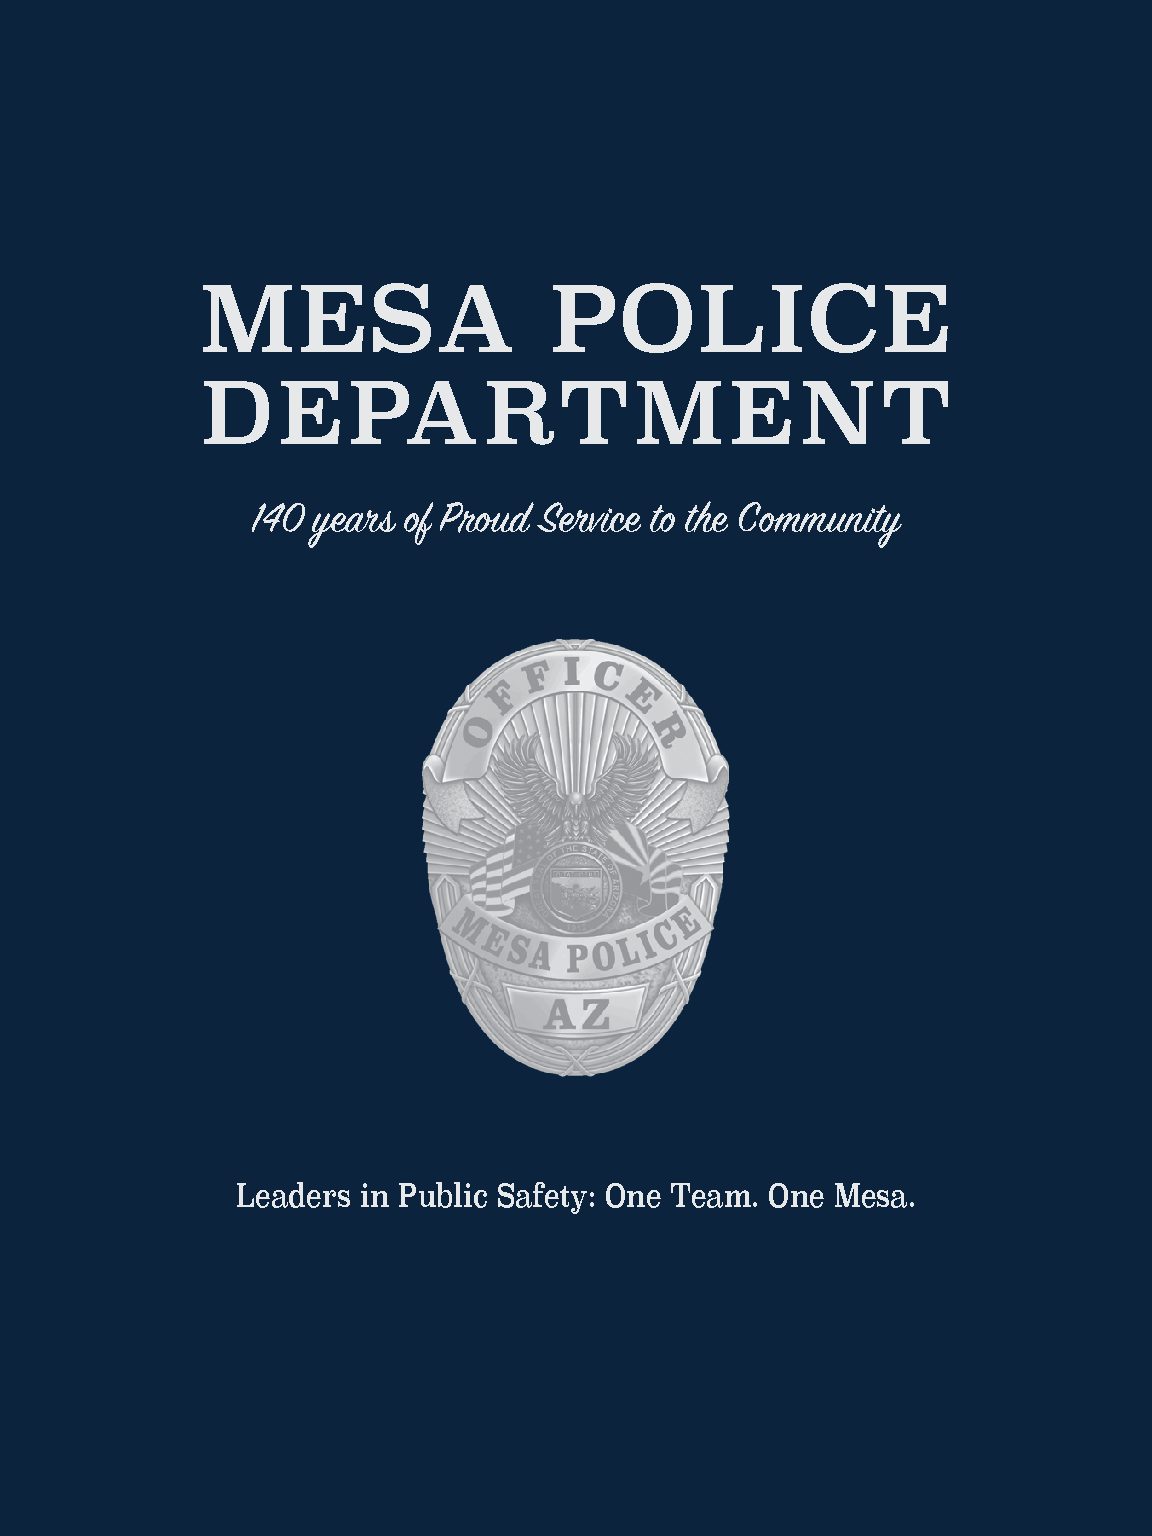 Mesa Police Department 140 Years of Proud Service to the Community